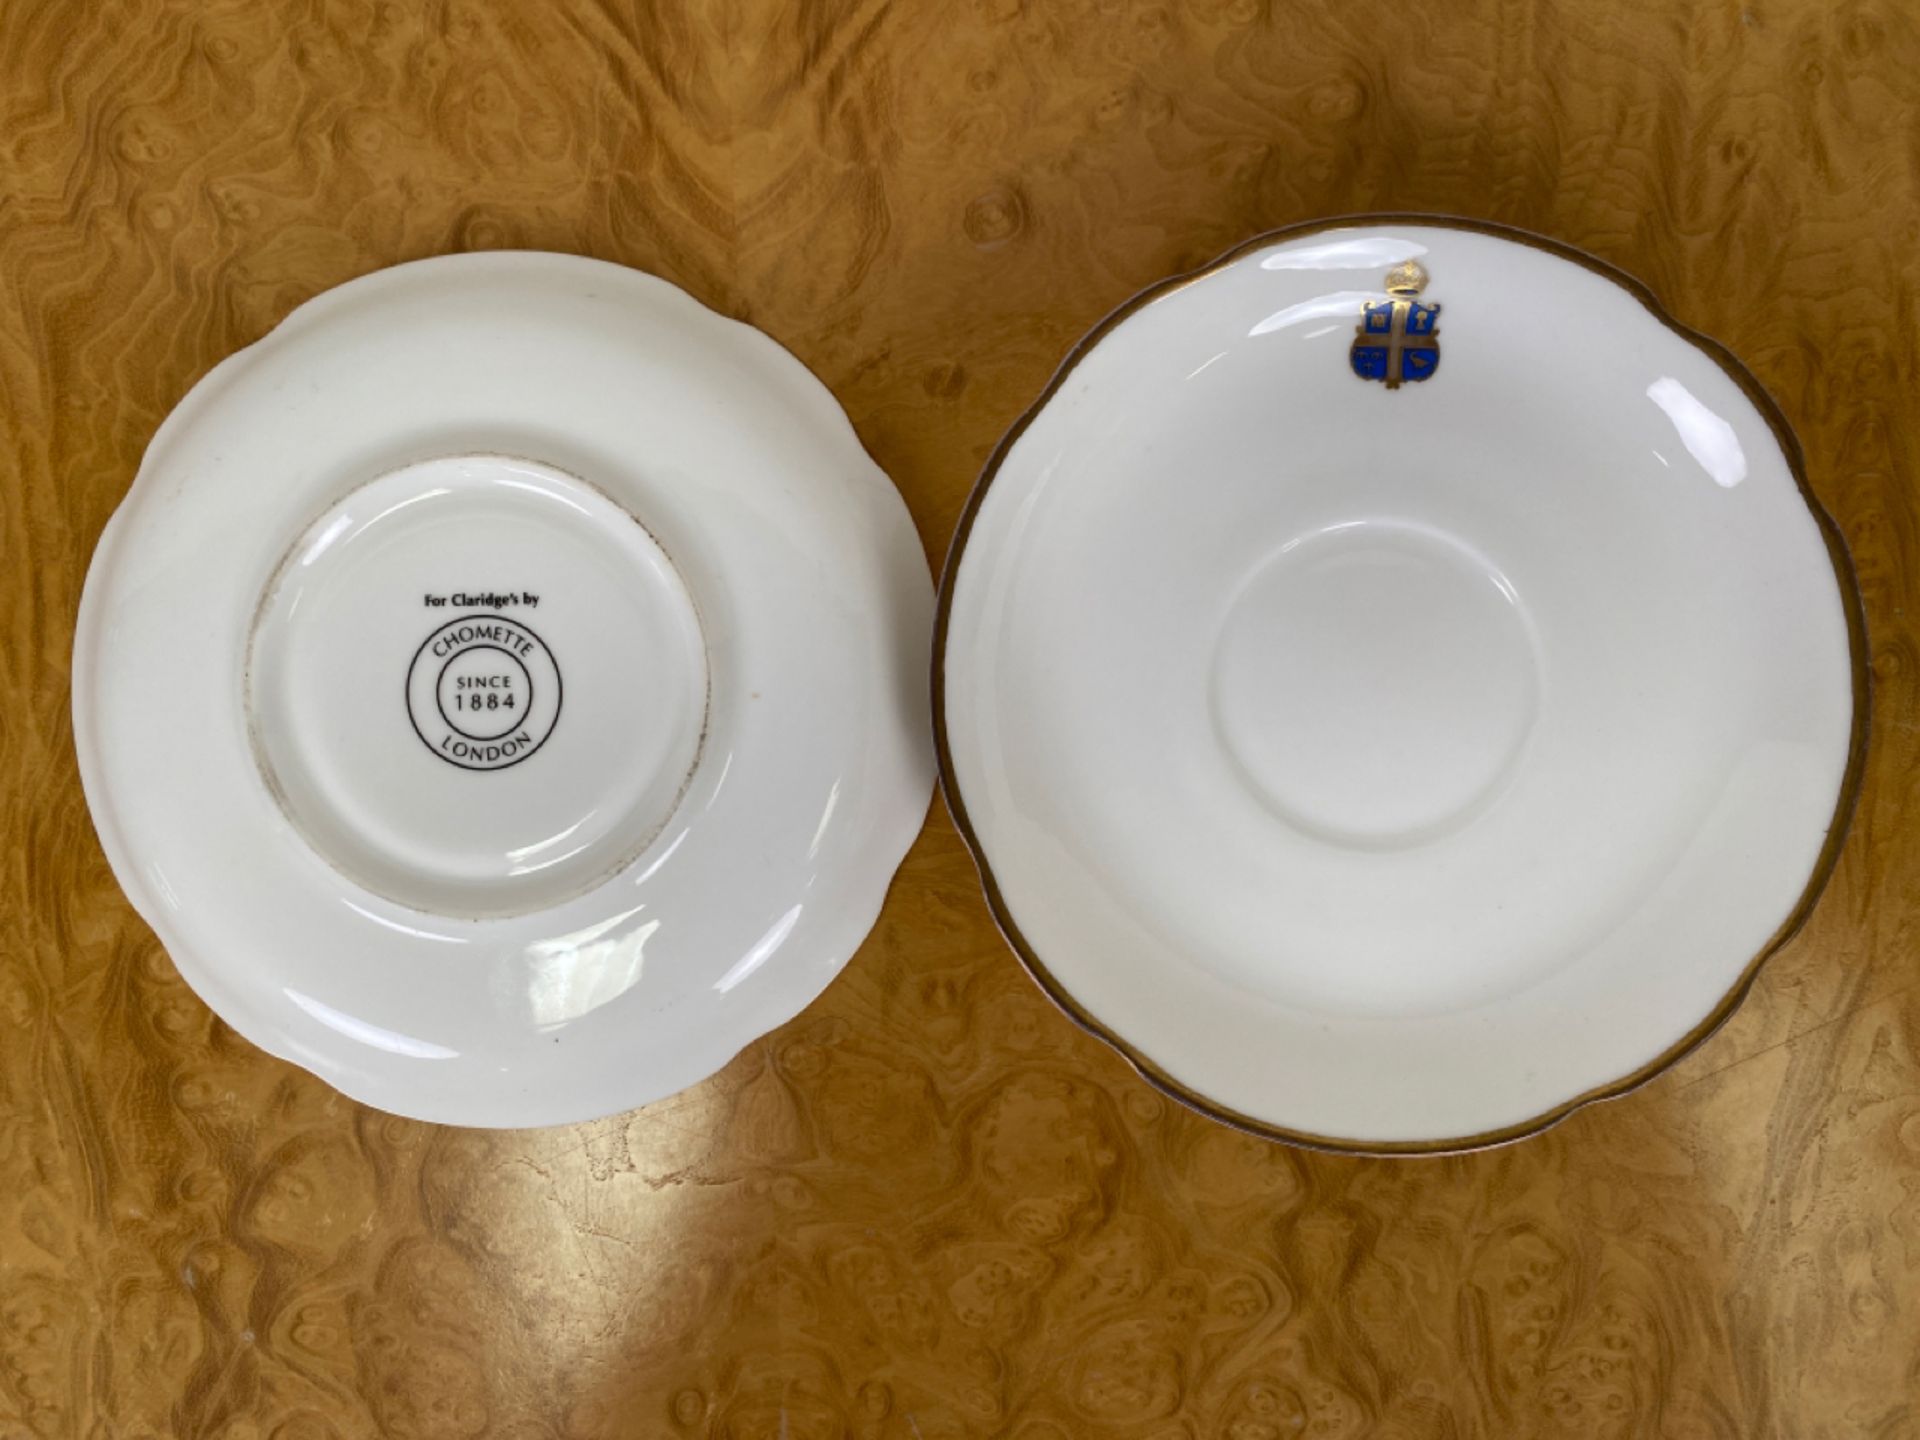 Set of Crested Crockery for Claridge's by Chommette 1884 - Image 15 of 36